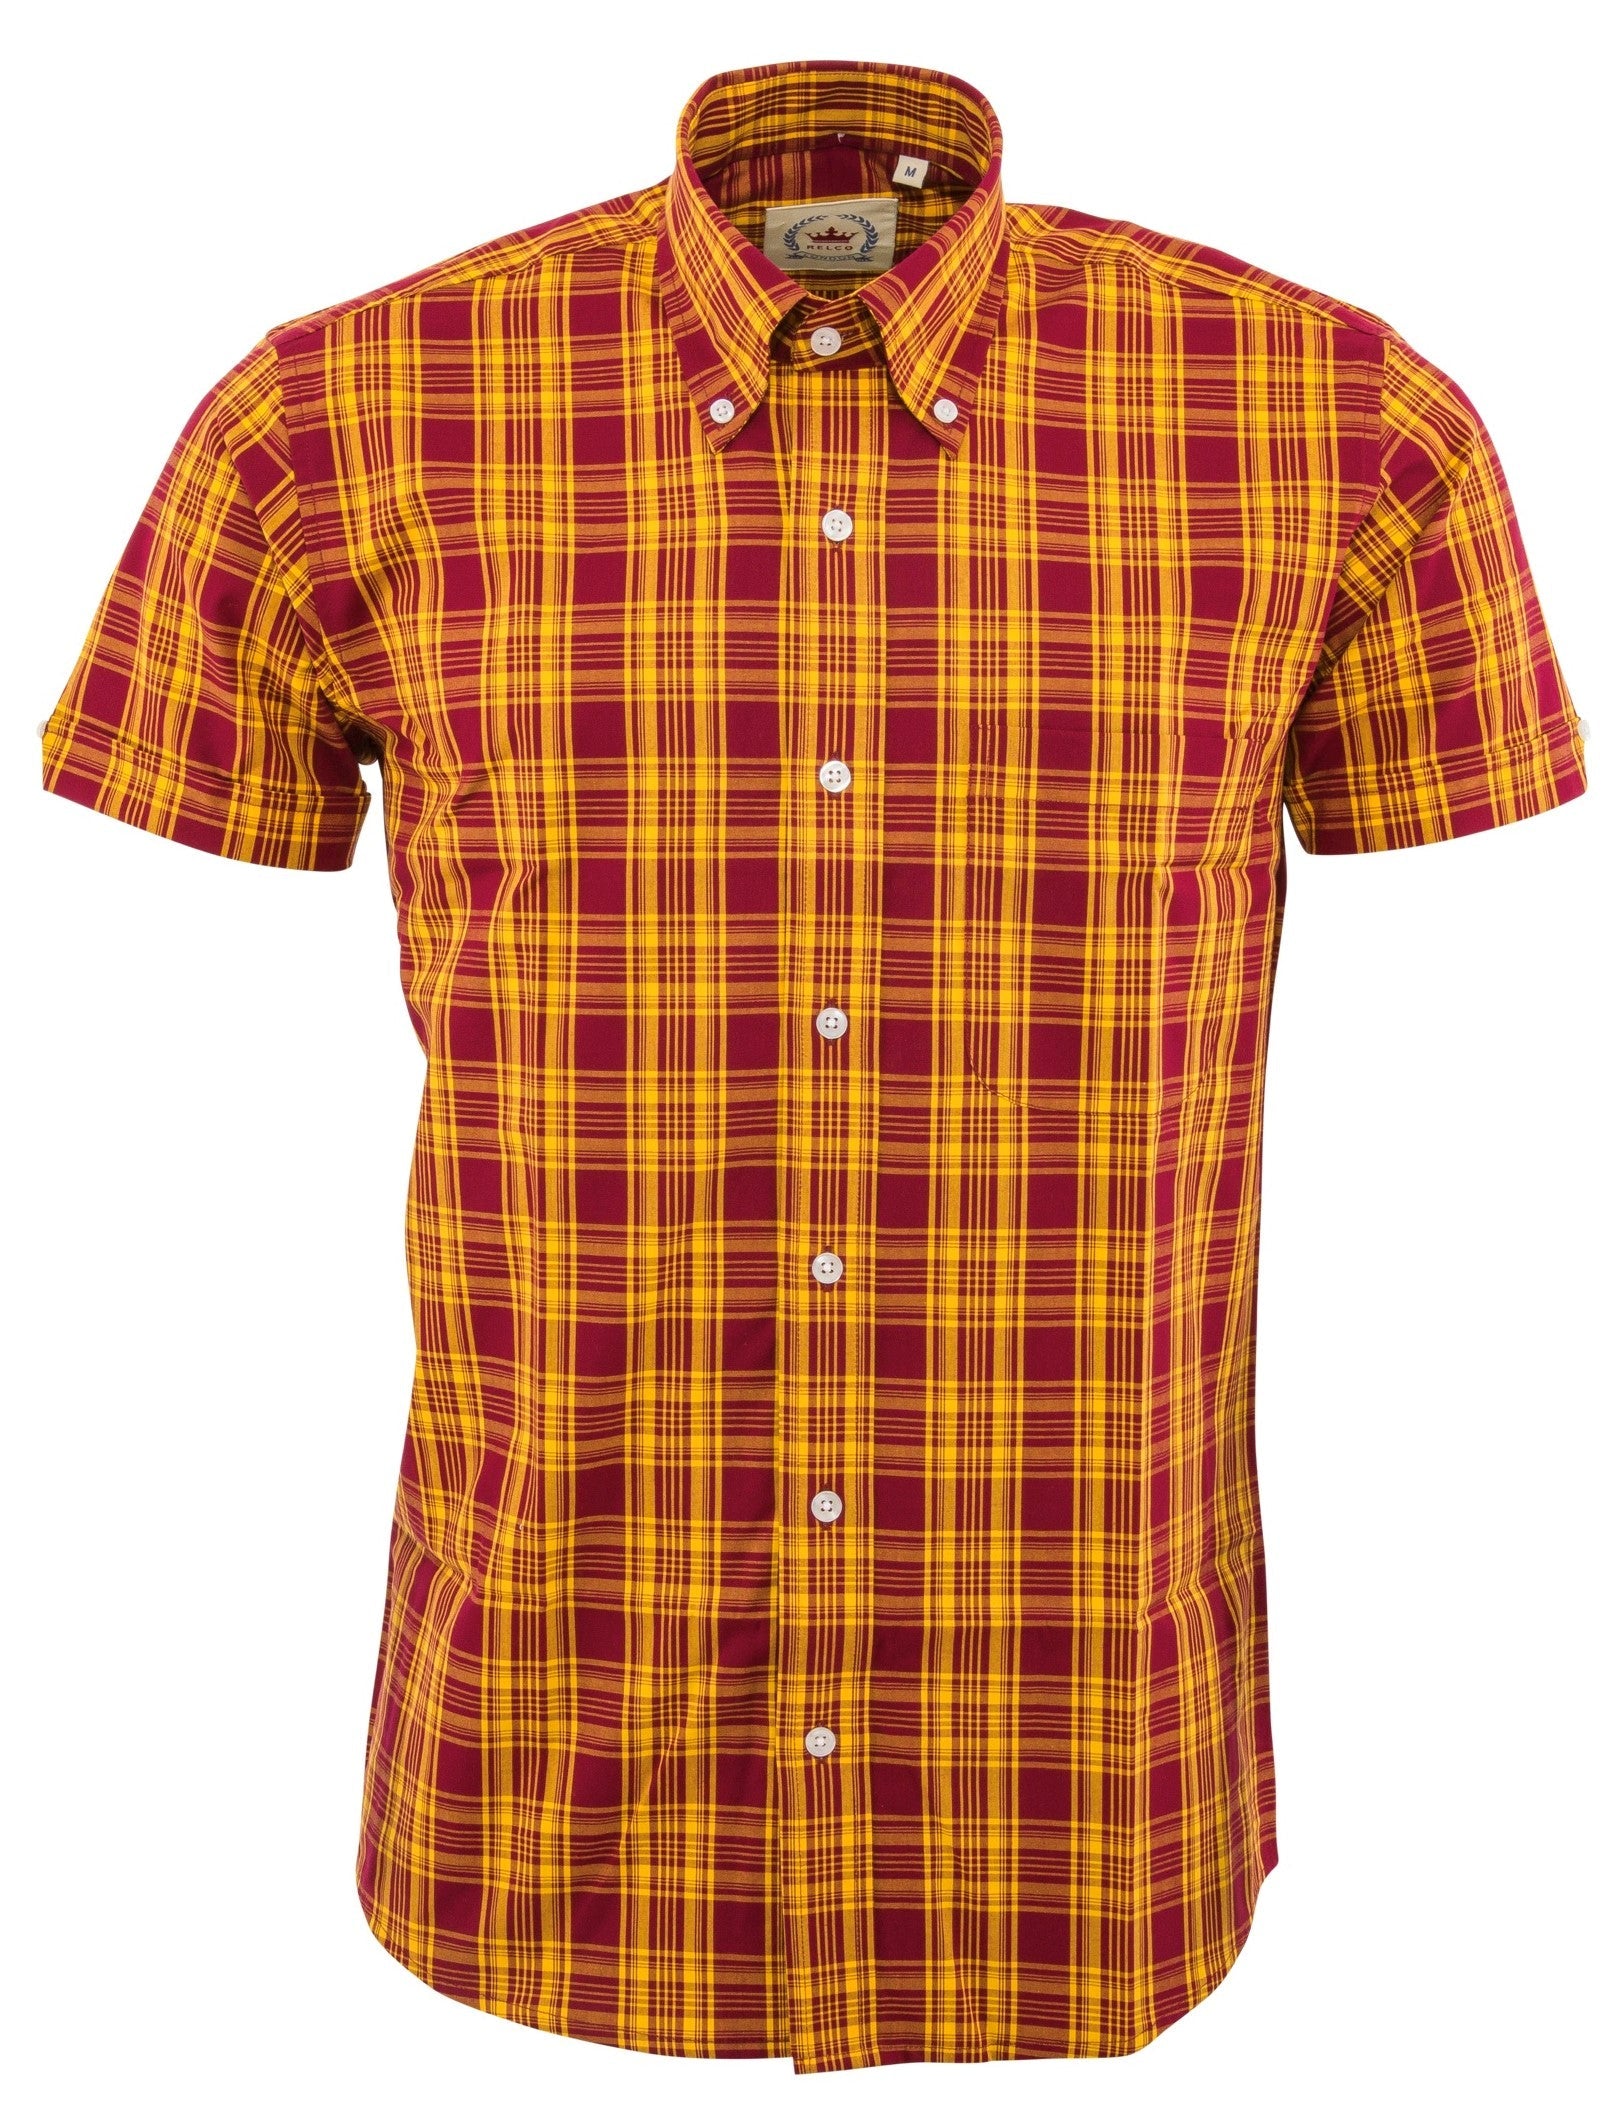 Relco Mens Burgundy & Mustard Checked Short Sleeved Button Down Shirts ...